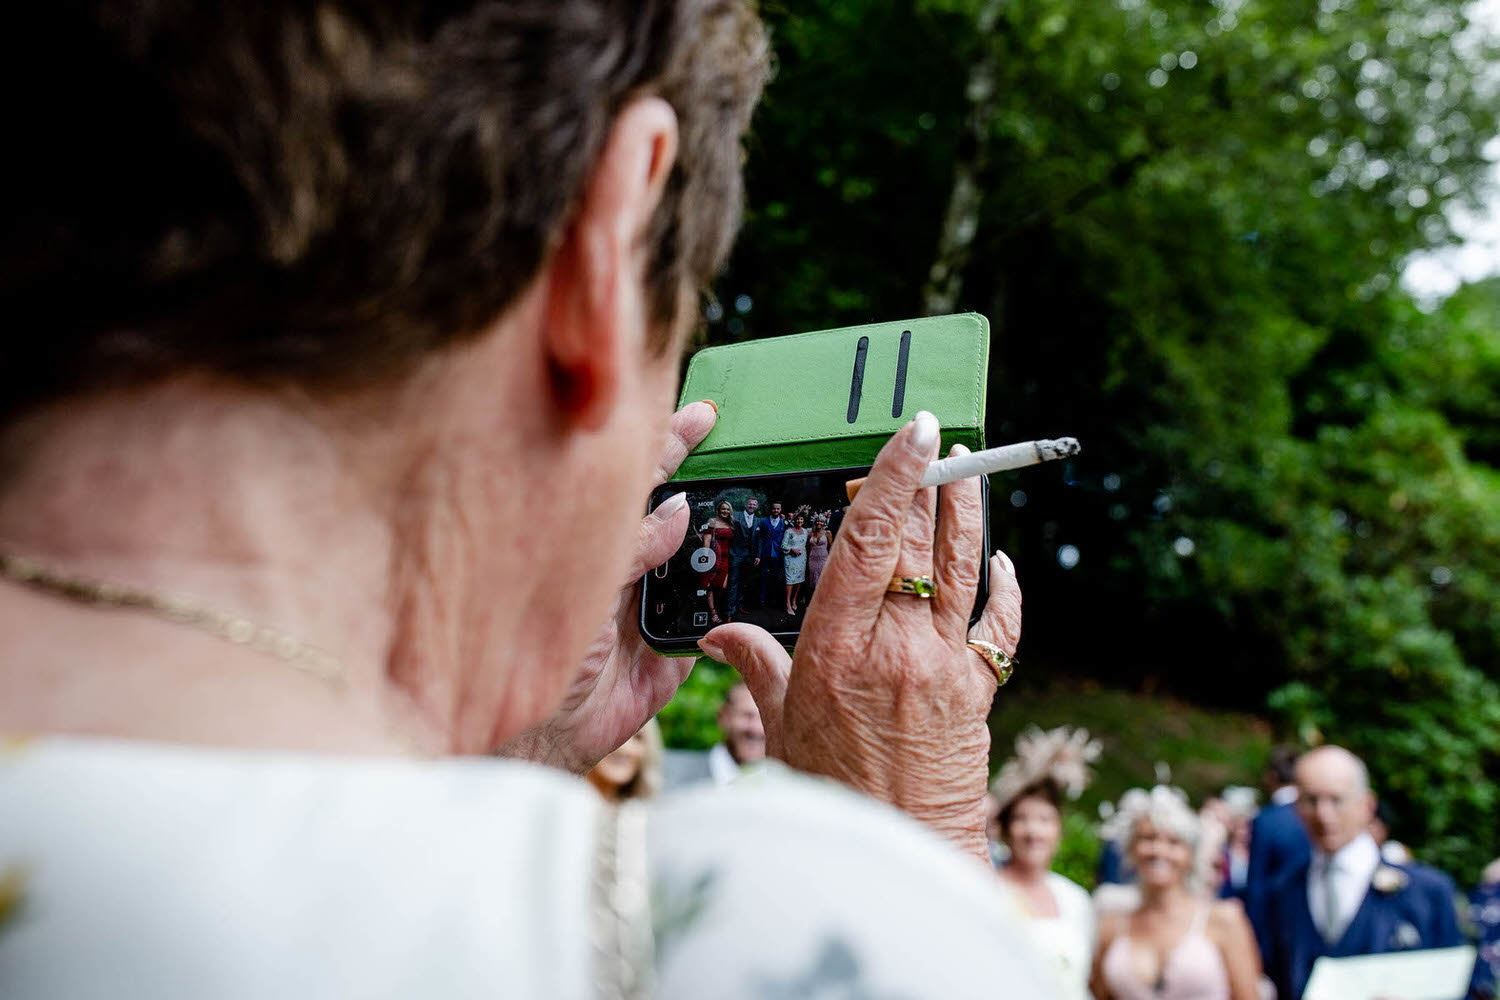 gran takes a family wedding photograph on her phone